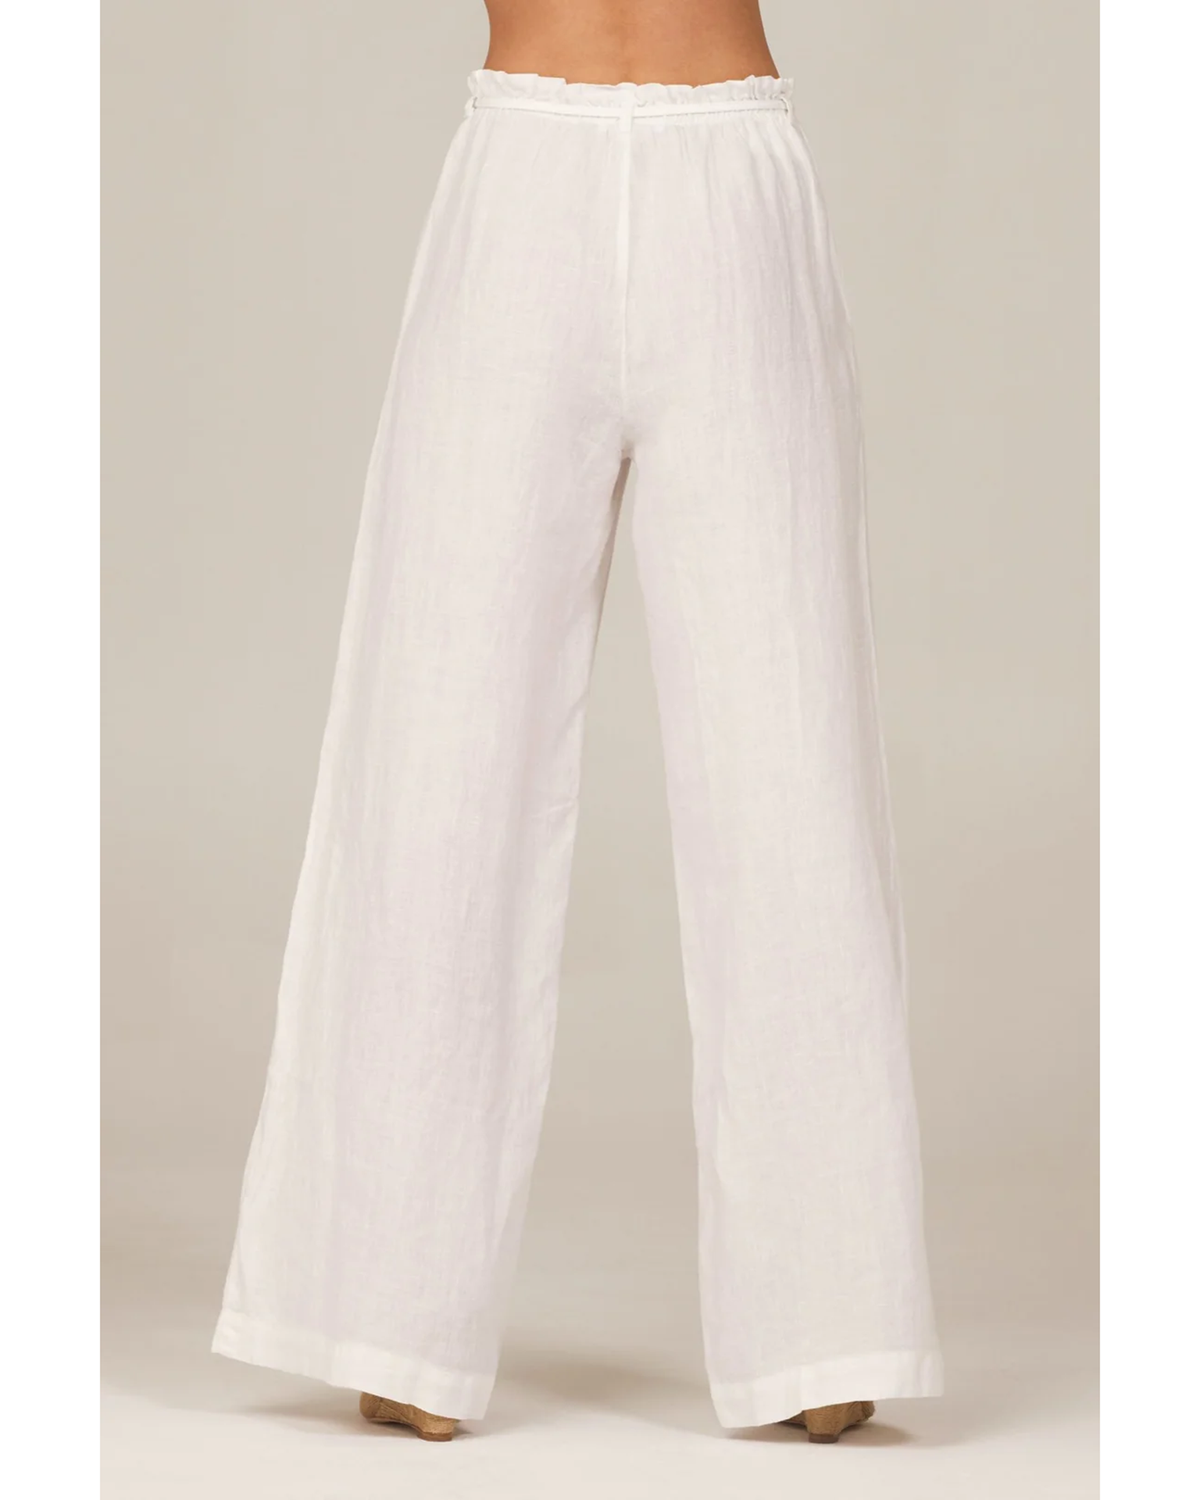 Drawcord Wide Leg Pant in White